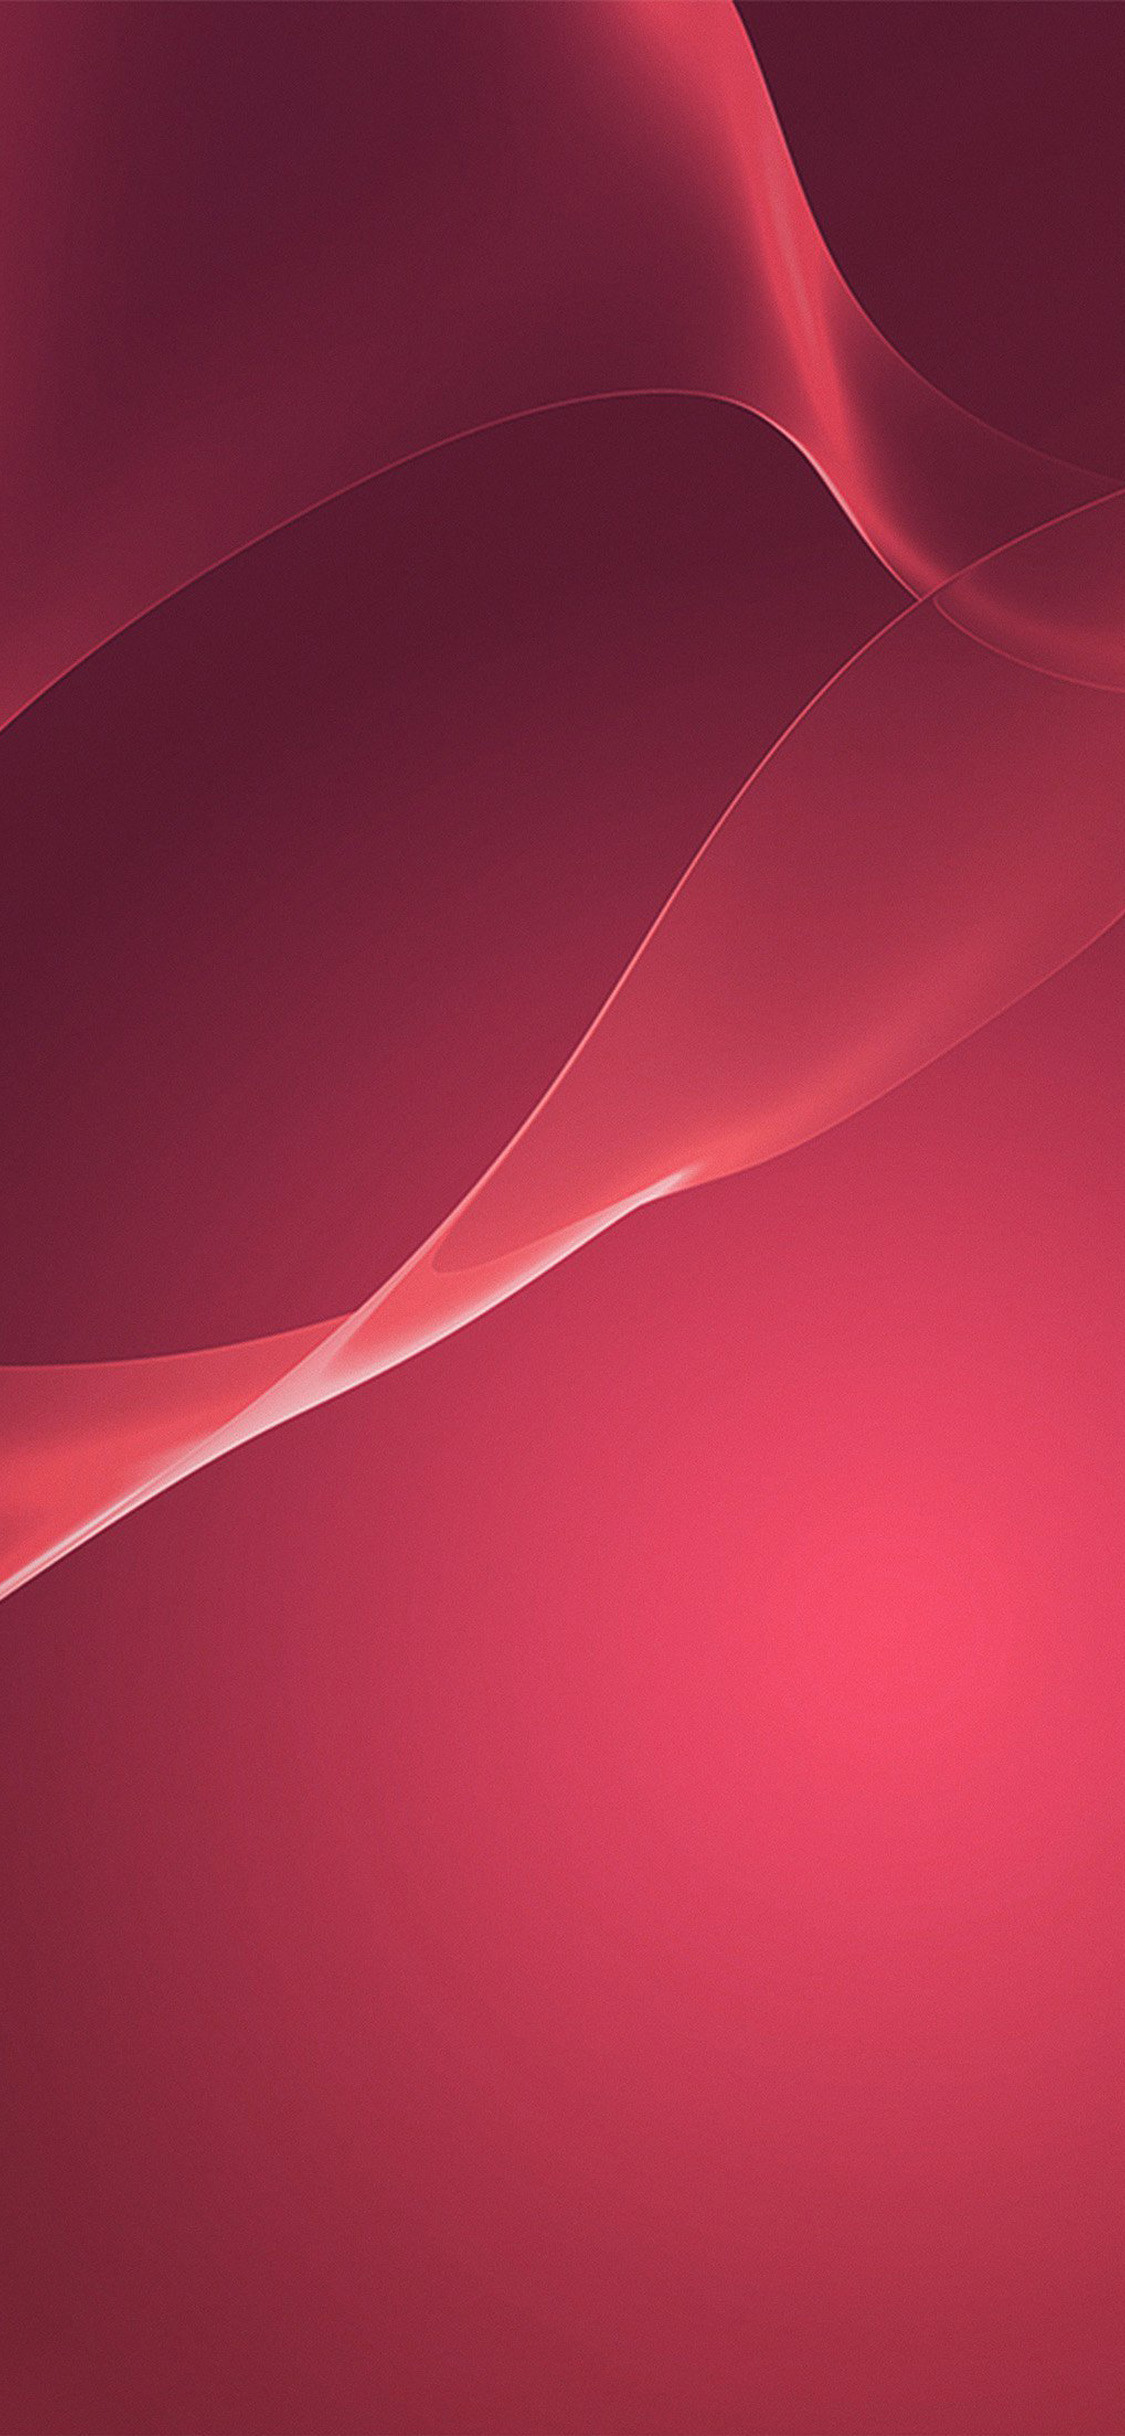 iPhone 13 Official Stock Wallpaper Twist Red  Light  Wallpapers Central   Sfondi iphone Sfondi per iphone Iphone